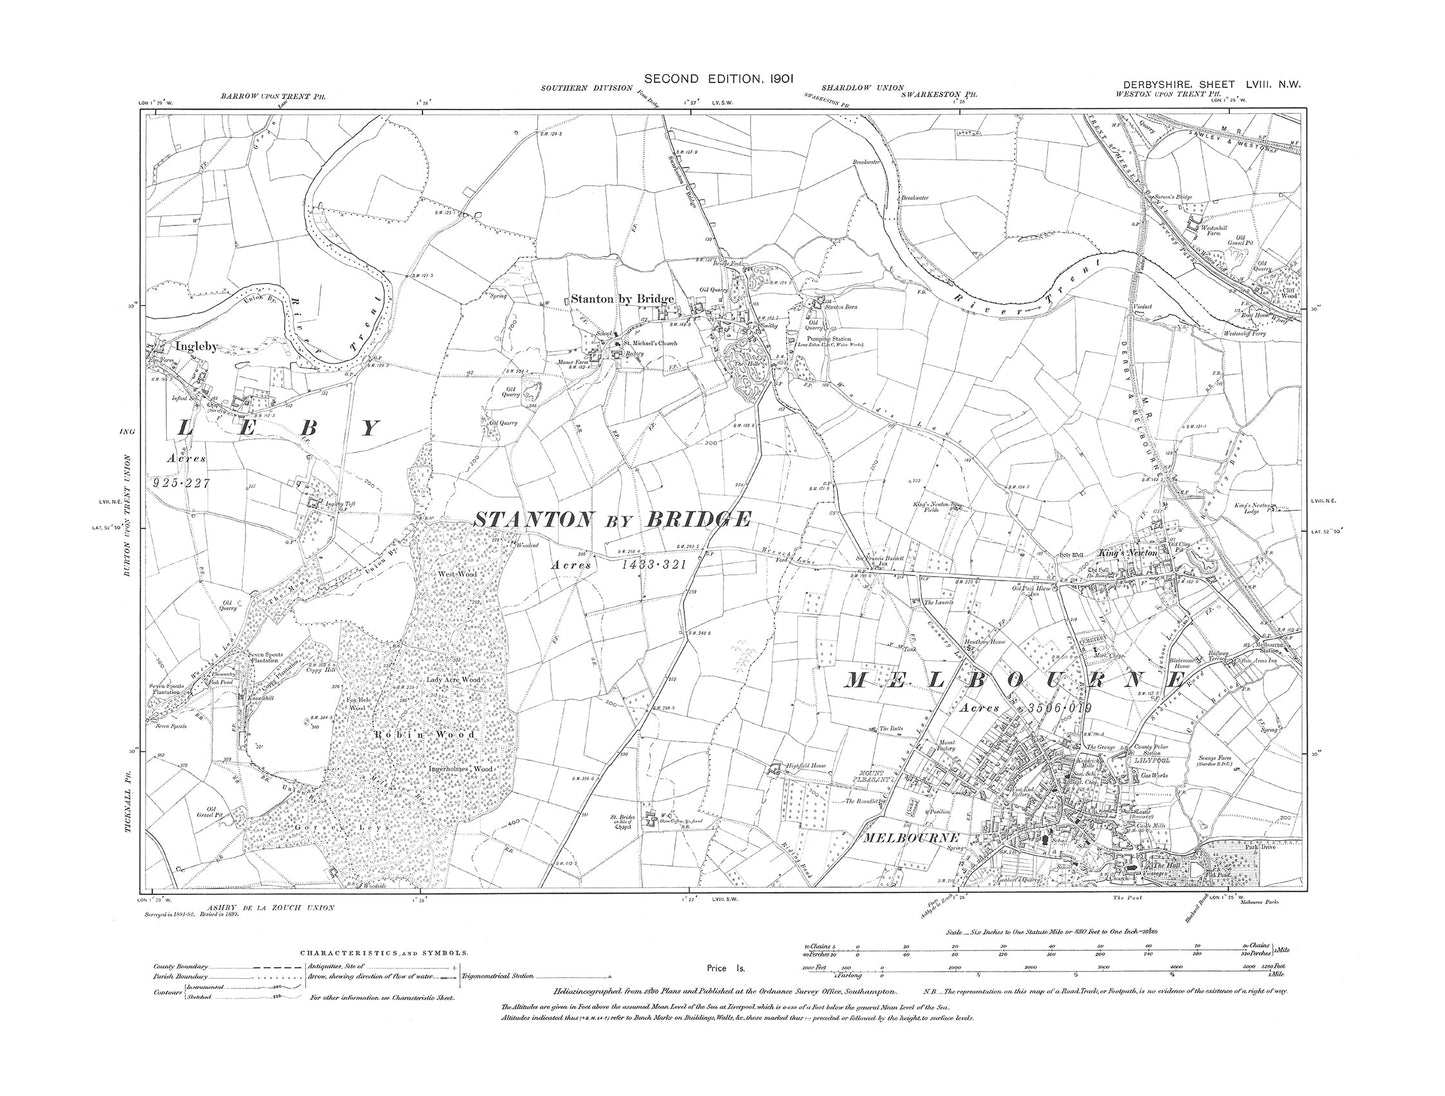 Old OS map dated 1901, showing Stanton by Bridge, Ingleby in Derbyshire 58NW